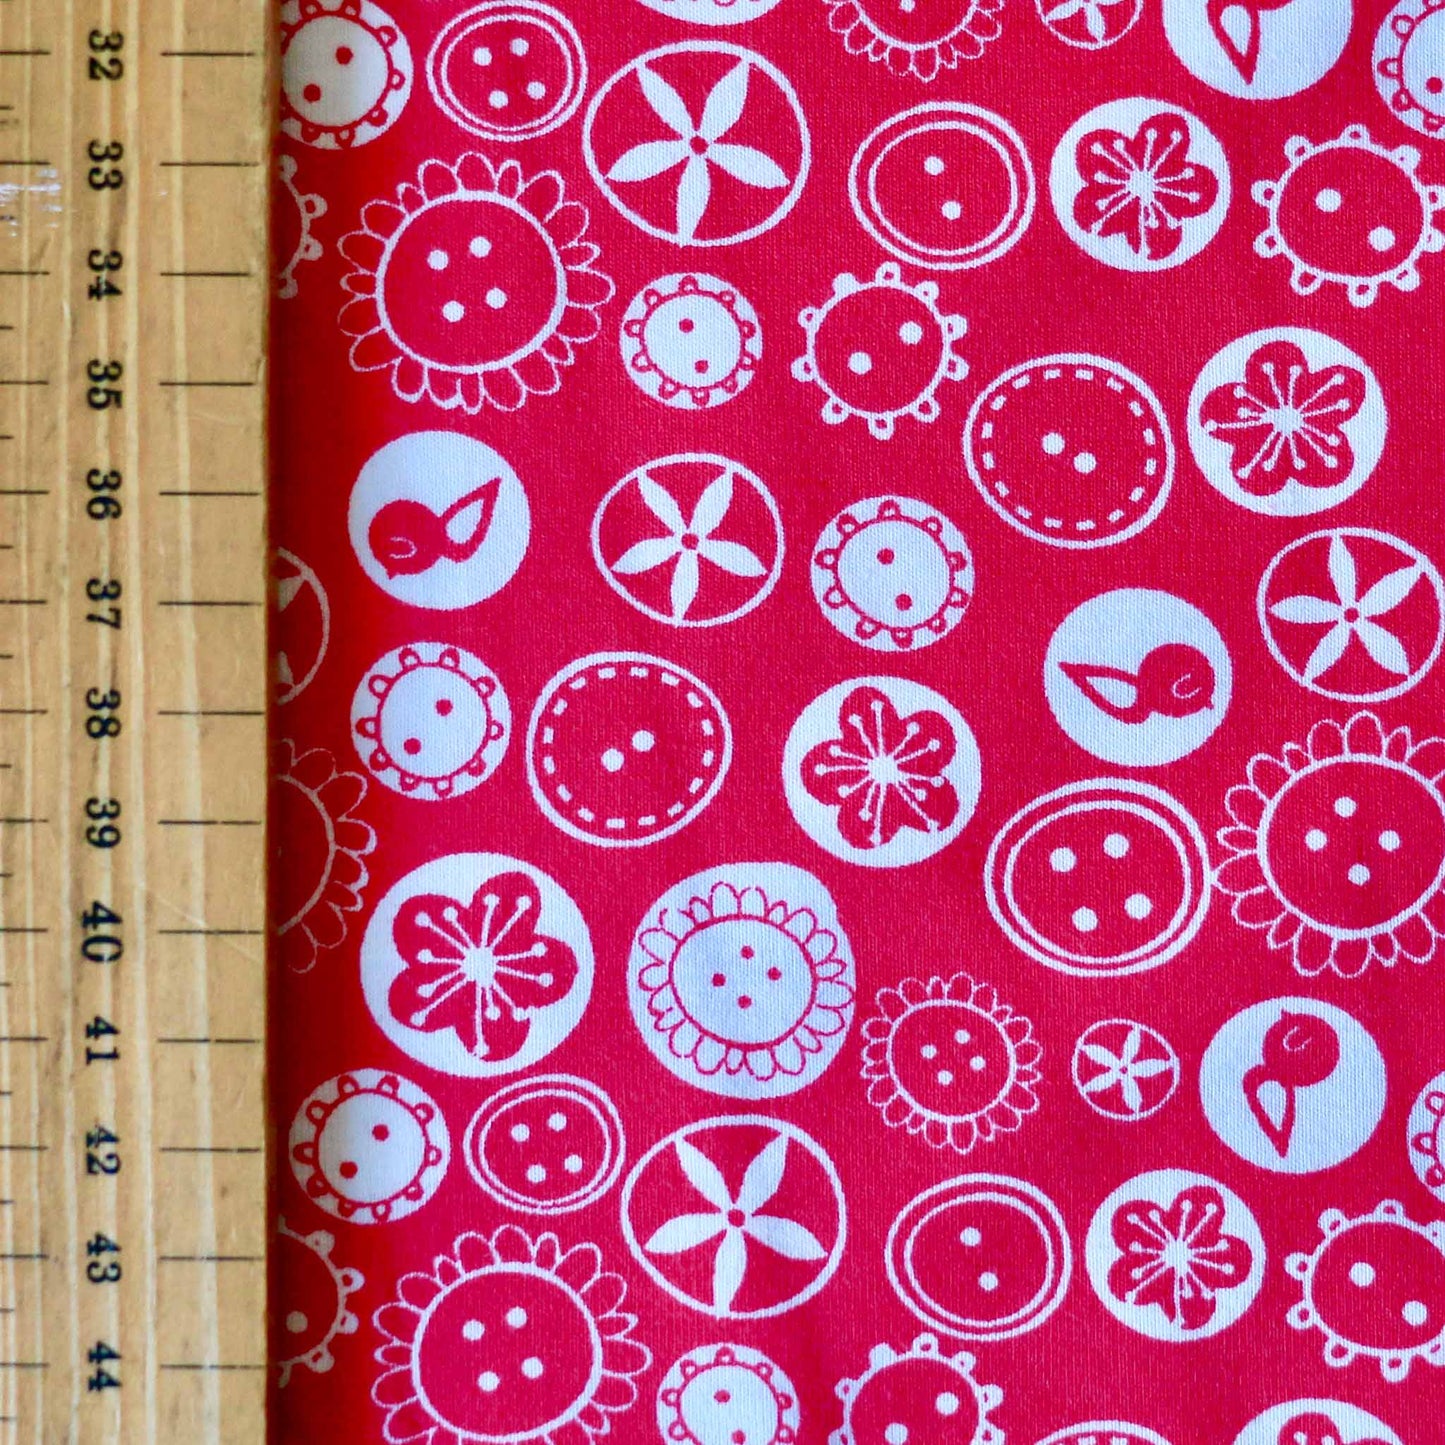 metre deadstock jersey cotton dressmaking fabric with white birds and flower print on pink colour